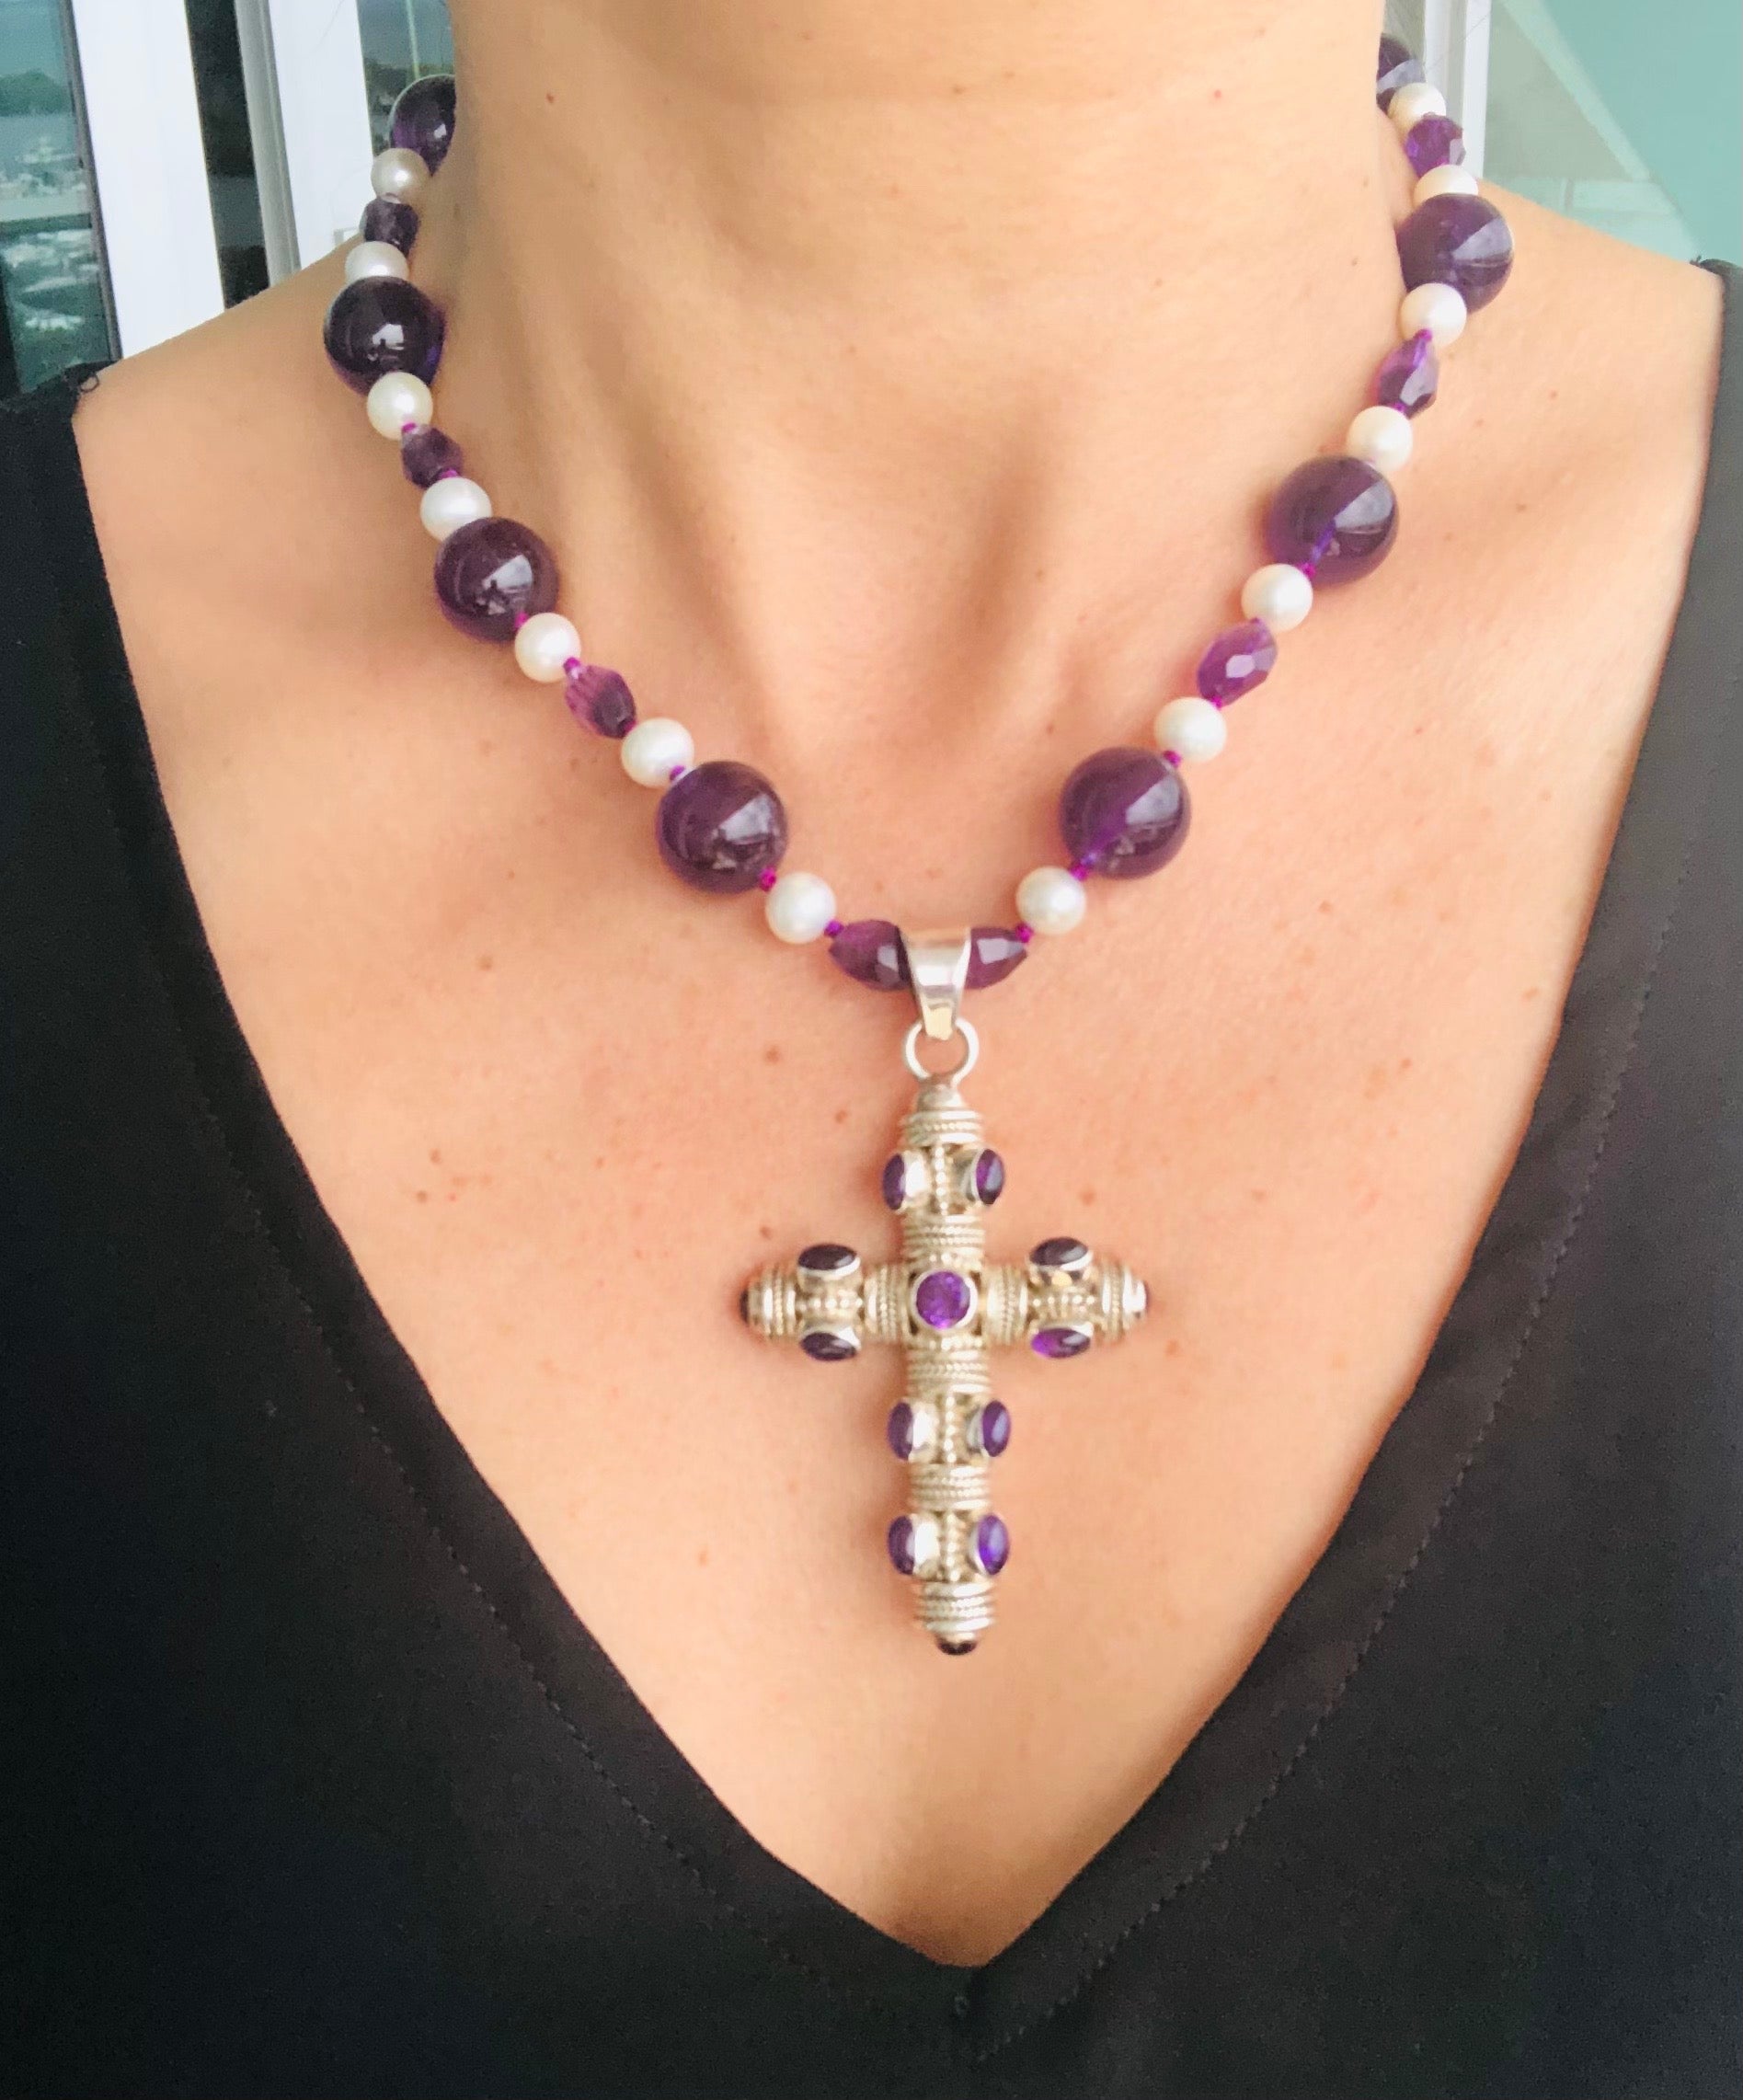 One-of-a-Kind

Looking for a unique and handsome piece of jewelry? Look no further than this stunning Amethyst and Sterling Silver cross necklace, paired with a beautiful Amethyst and Pearl necklace.

The focal point of this necklace is the heavy